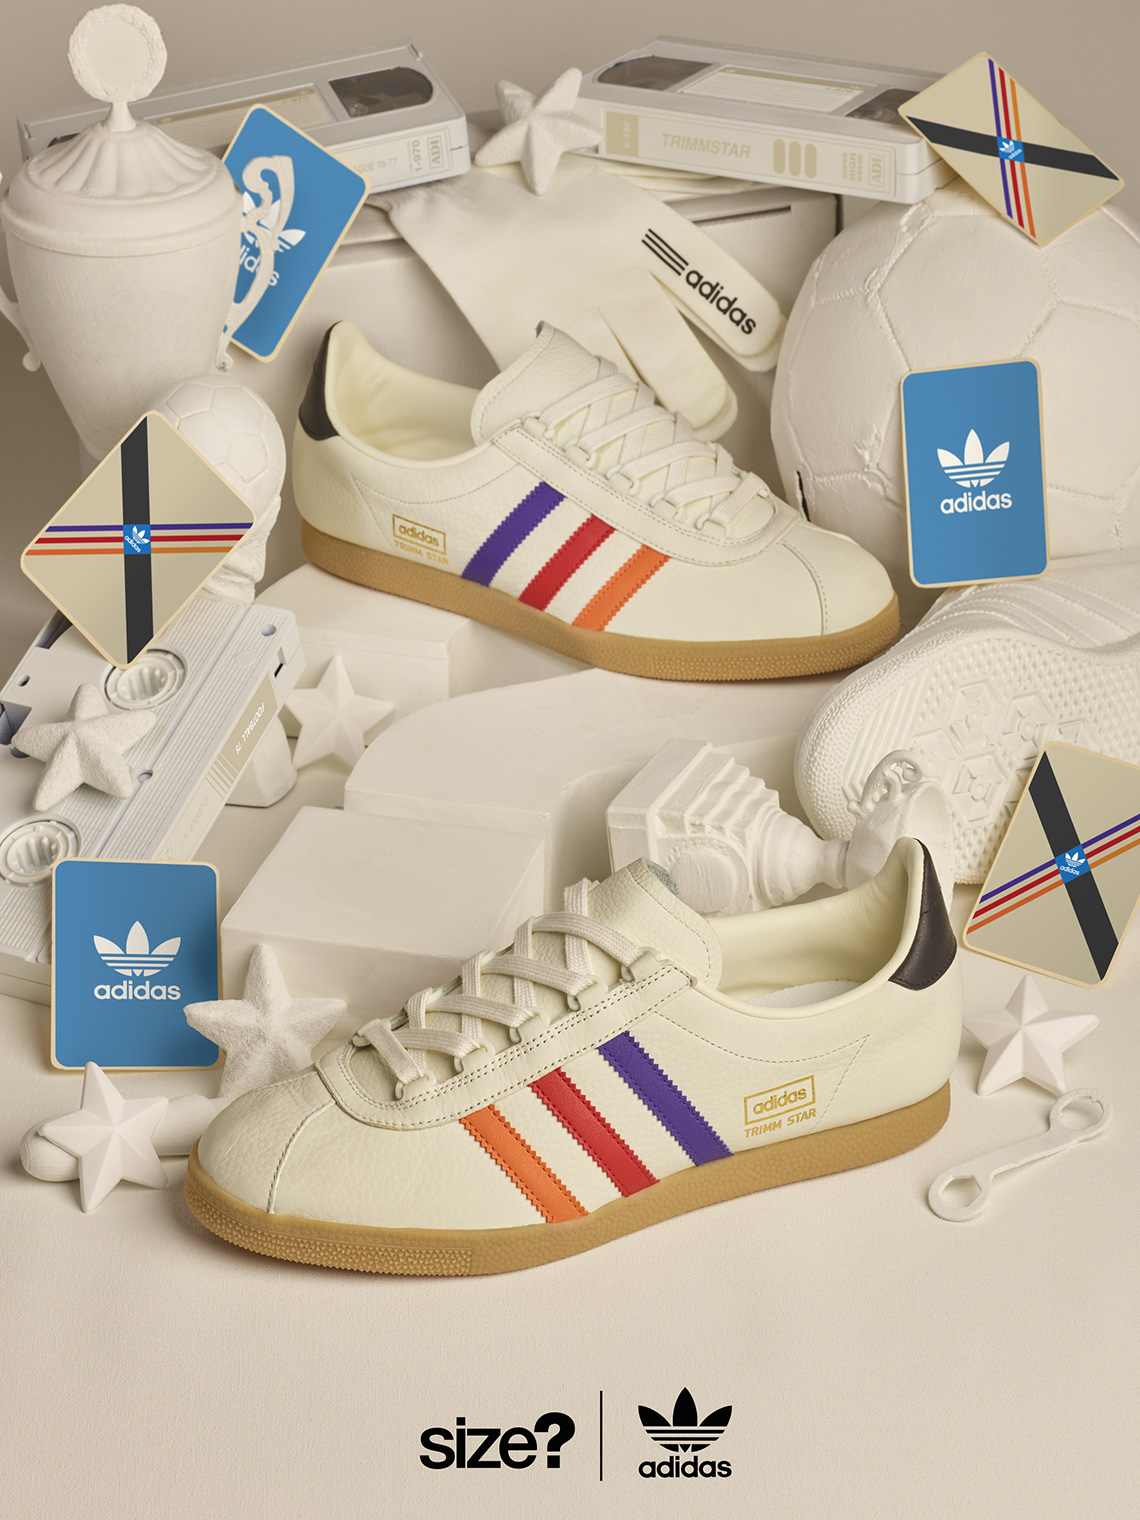 Size Adidas Trimm Star Vhs Release Info 3